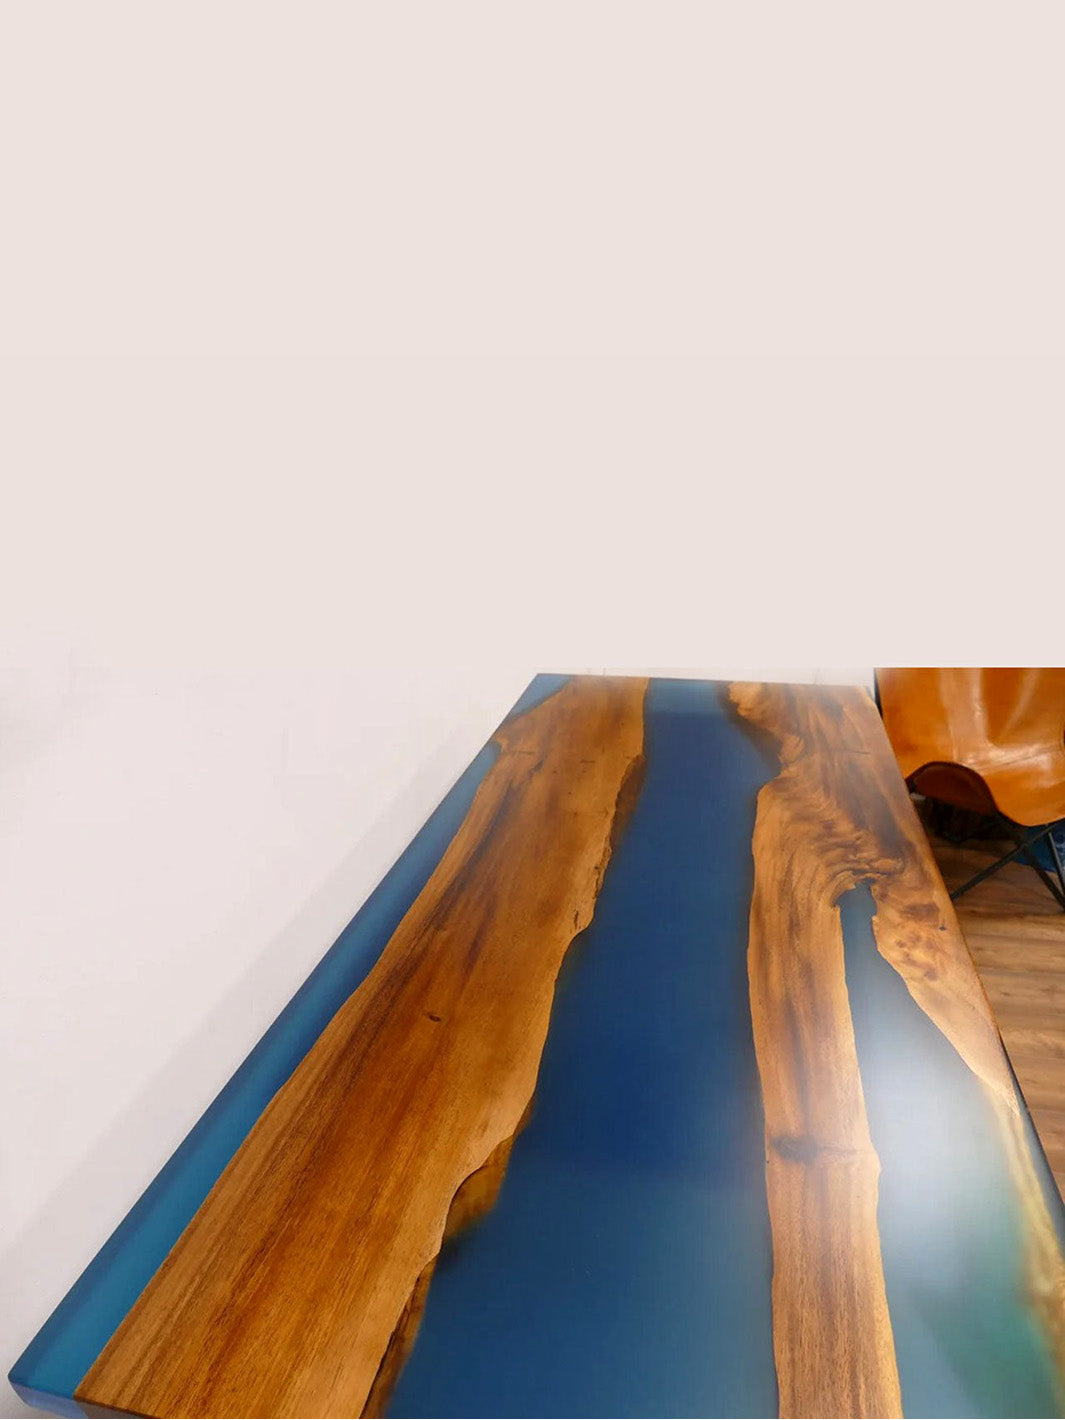 Handcrafted River Beach Epoxy Resin Wooden Dining Table | 170x70cm Made 4 Decor Tables MDR0006-2